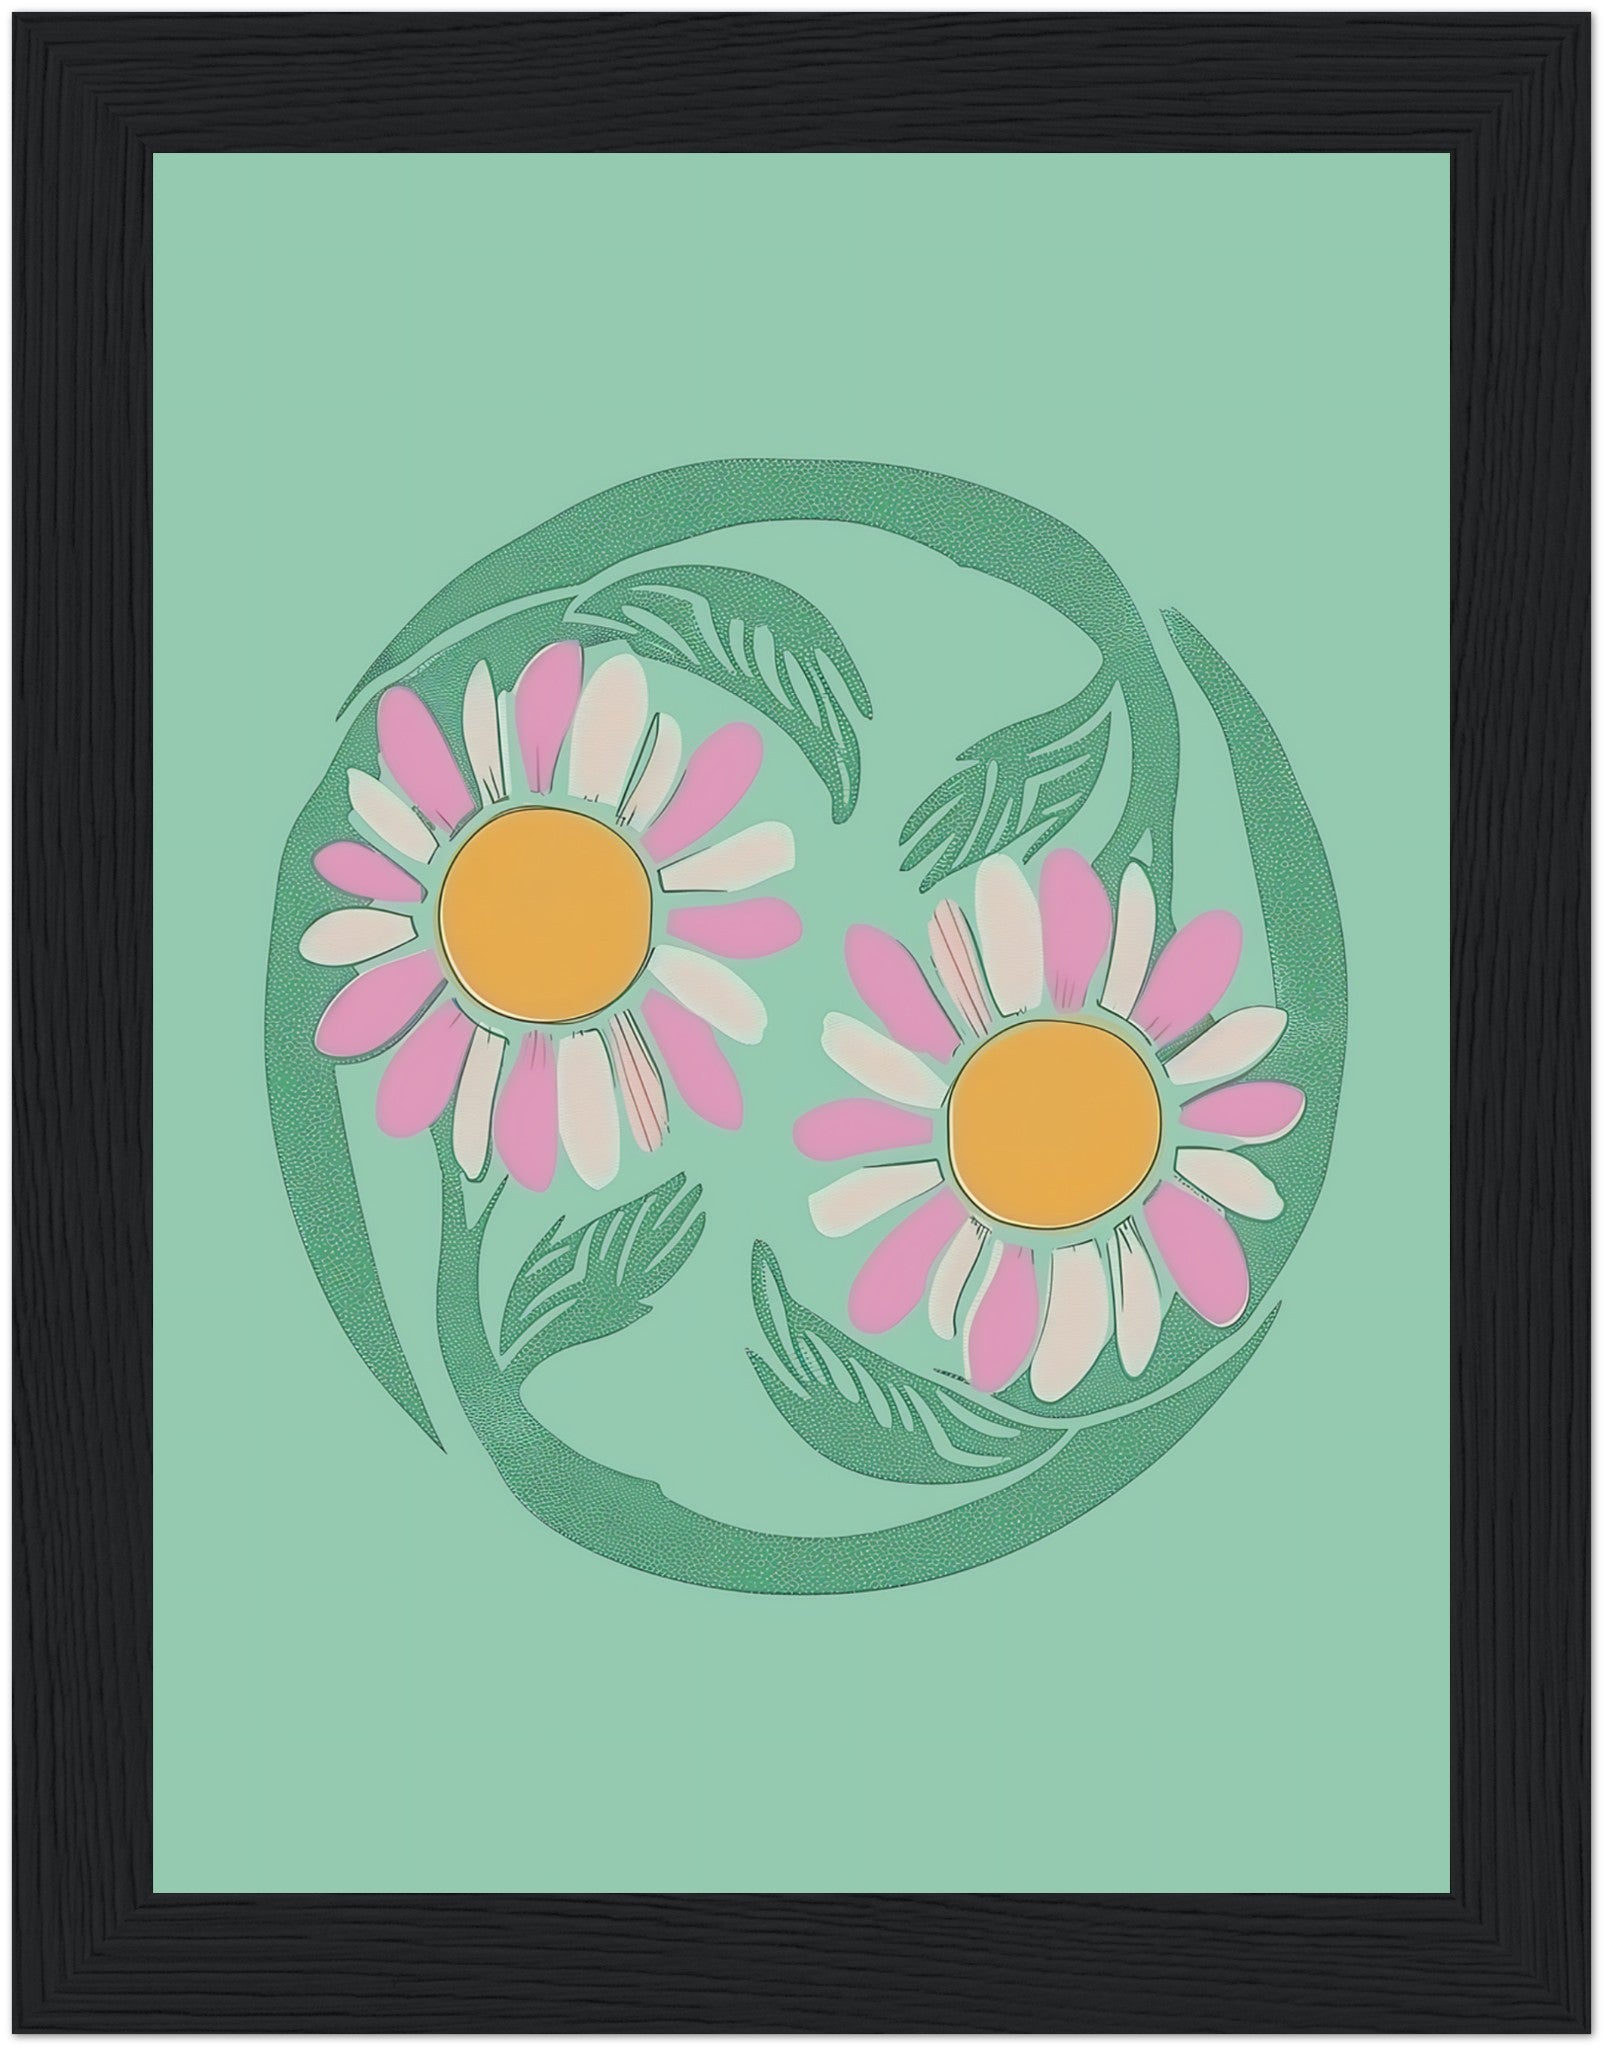 Stylized illustration of two daisies encircled by a green vine on a teal background with a brown frame.